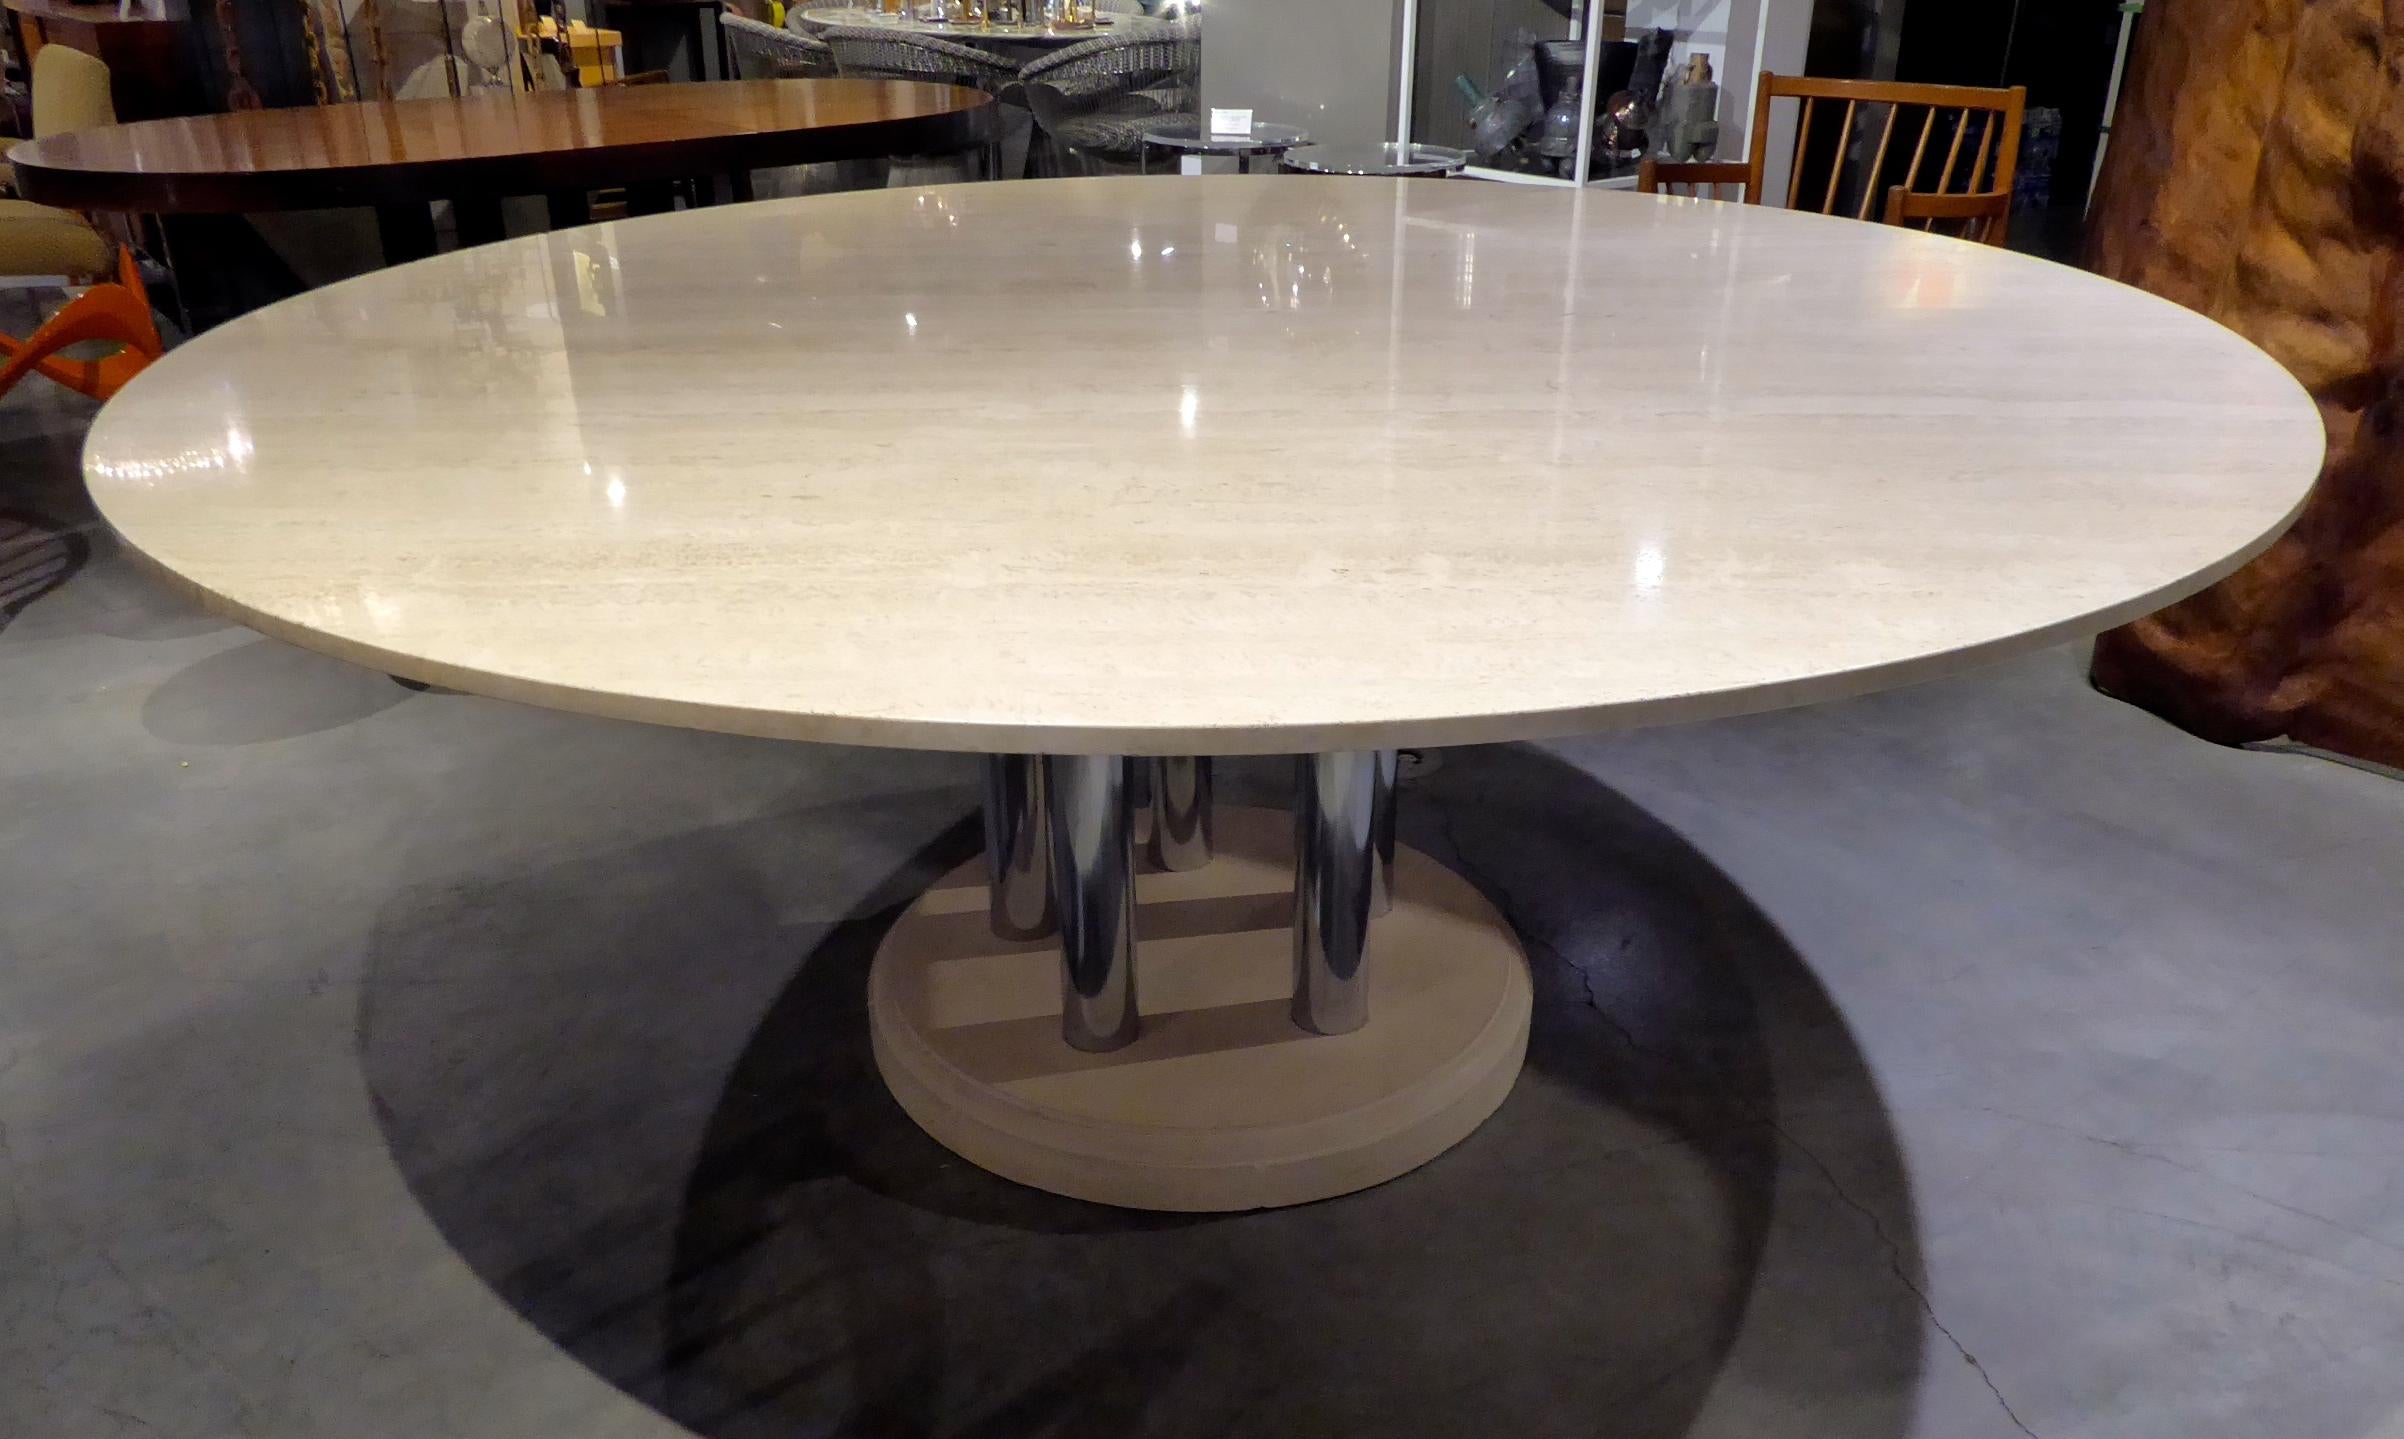 A travertine and chrome-plated steel circular dining table (style #7003) made by Pace Collection in the 1970s. The table was a custom travertine version of the 7000 series conference or dining table. An original quarter-inch thick glass top